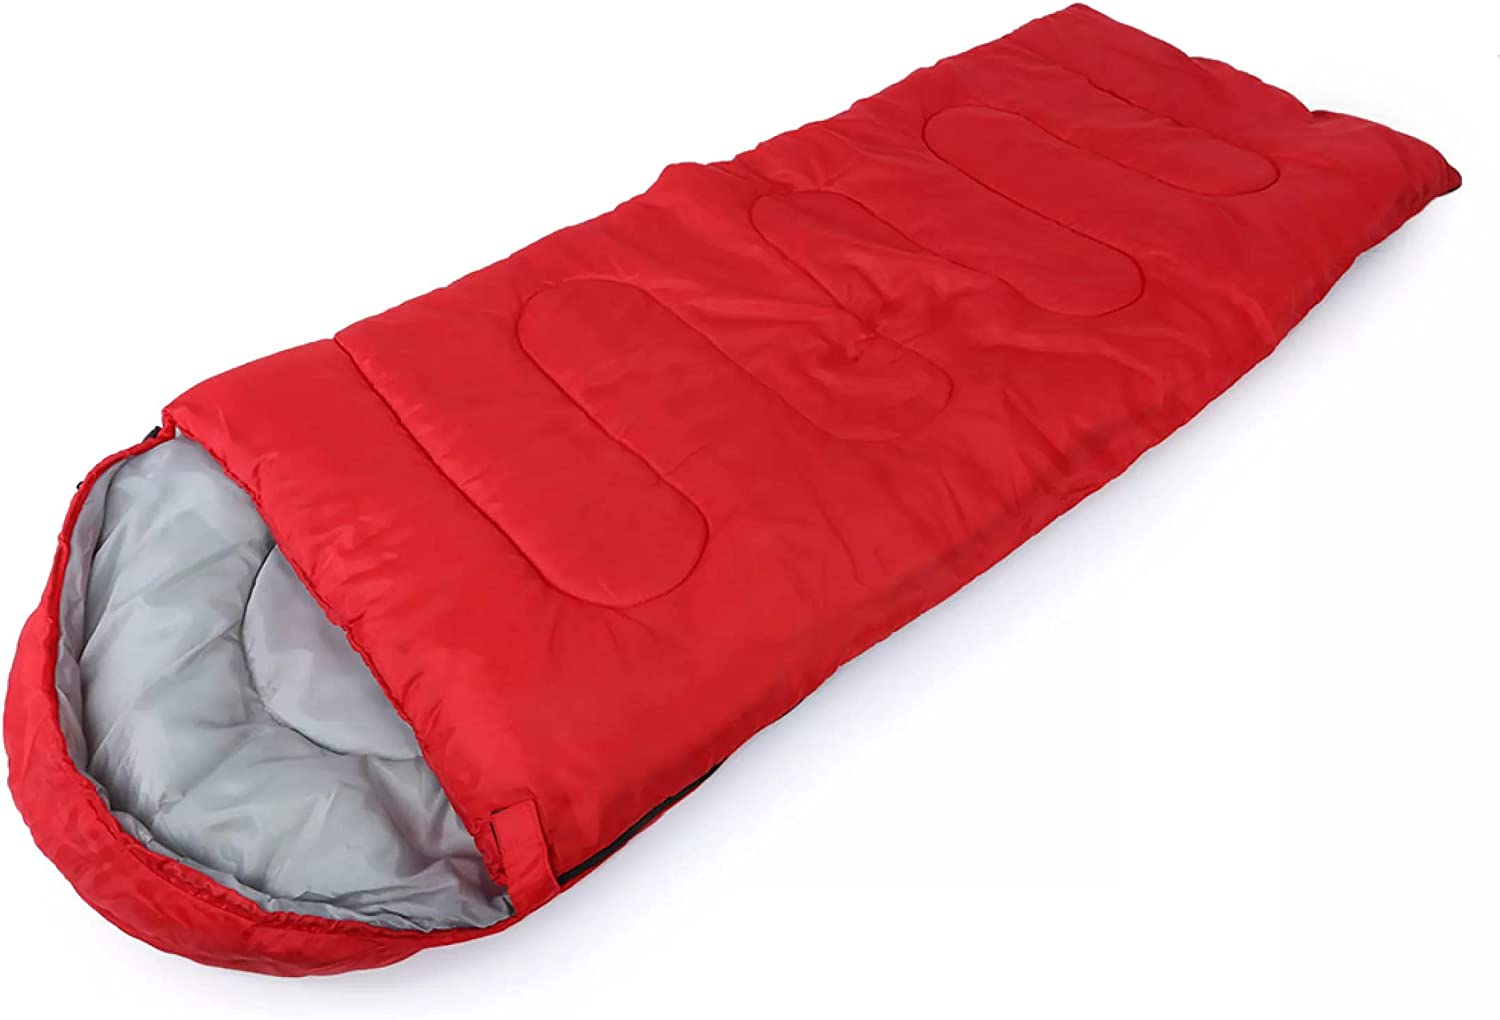 EZONEDEAL Sleeping Bags for Adults Teens Kids, Envelope Portable and Lightweight for 2-3Season Camping, Hiking, Traveling, Backpacking and Outdoor Activities